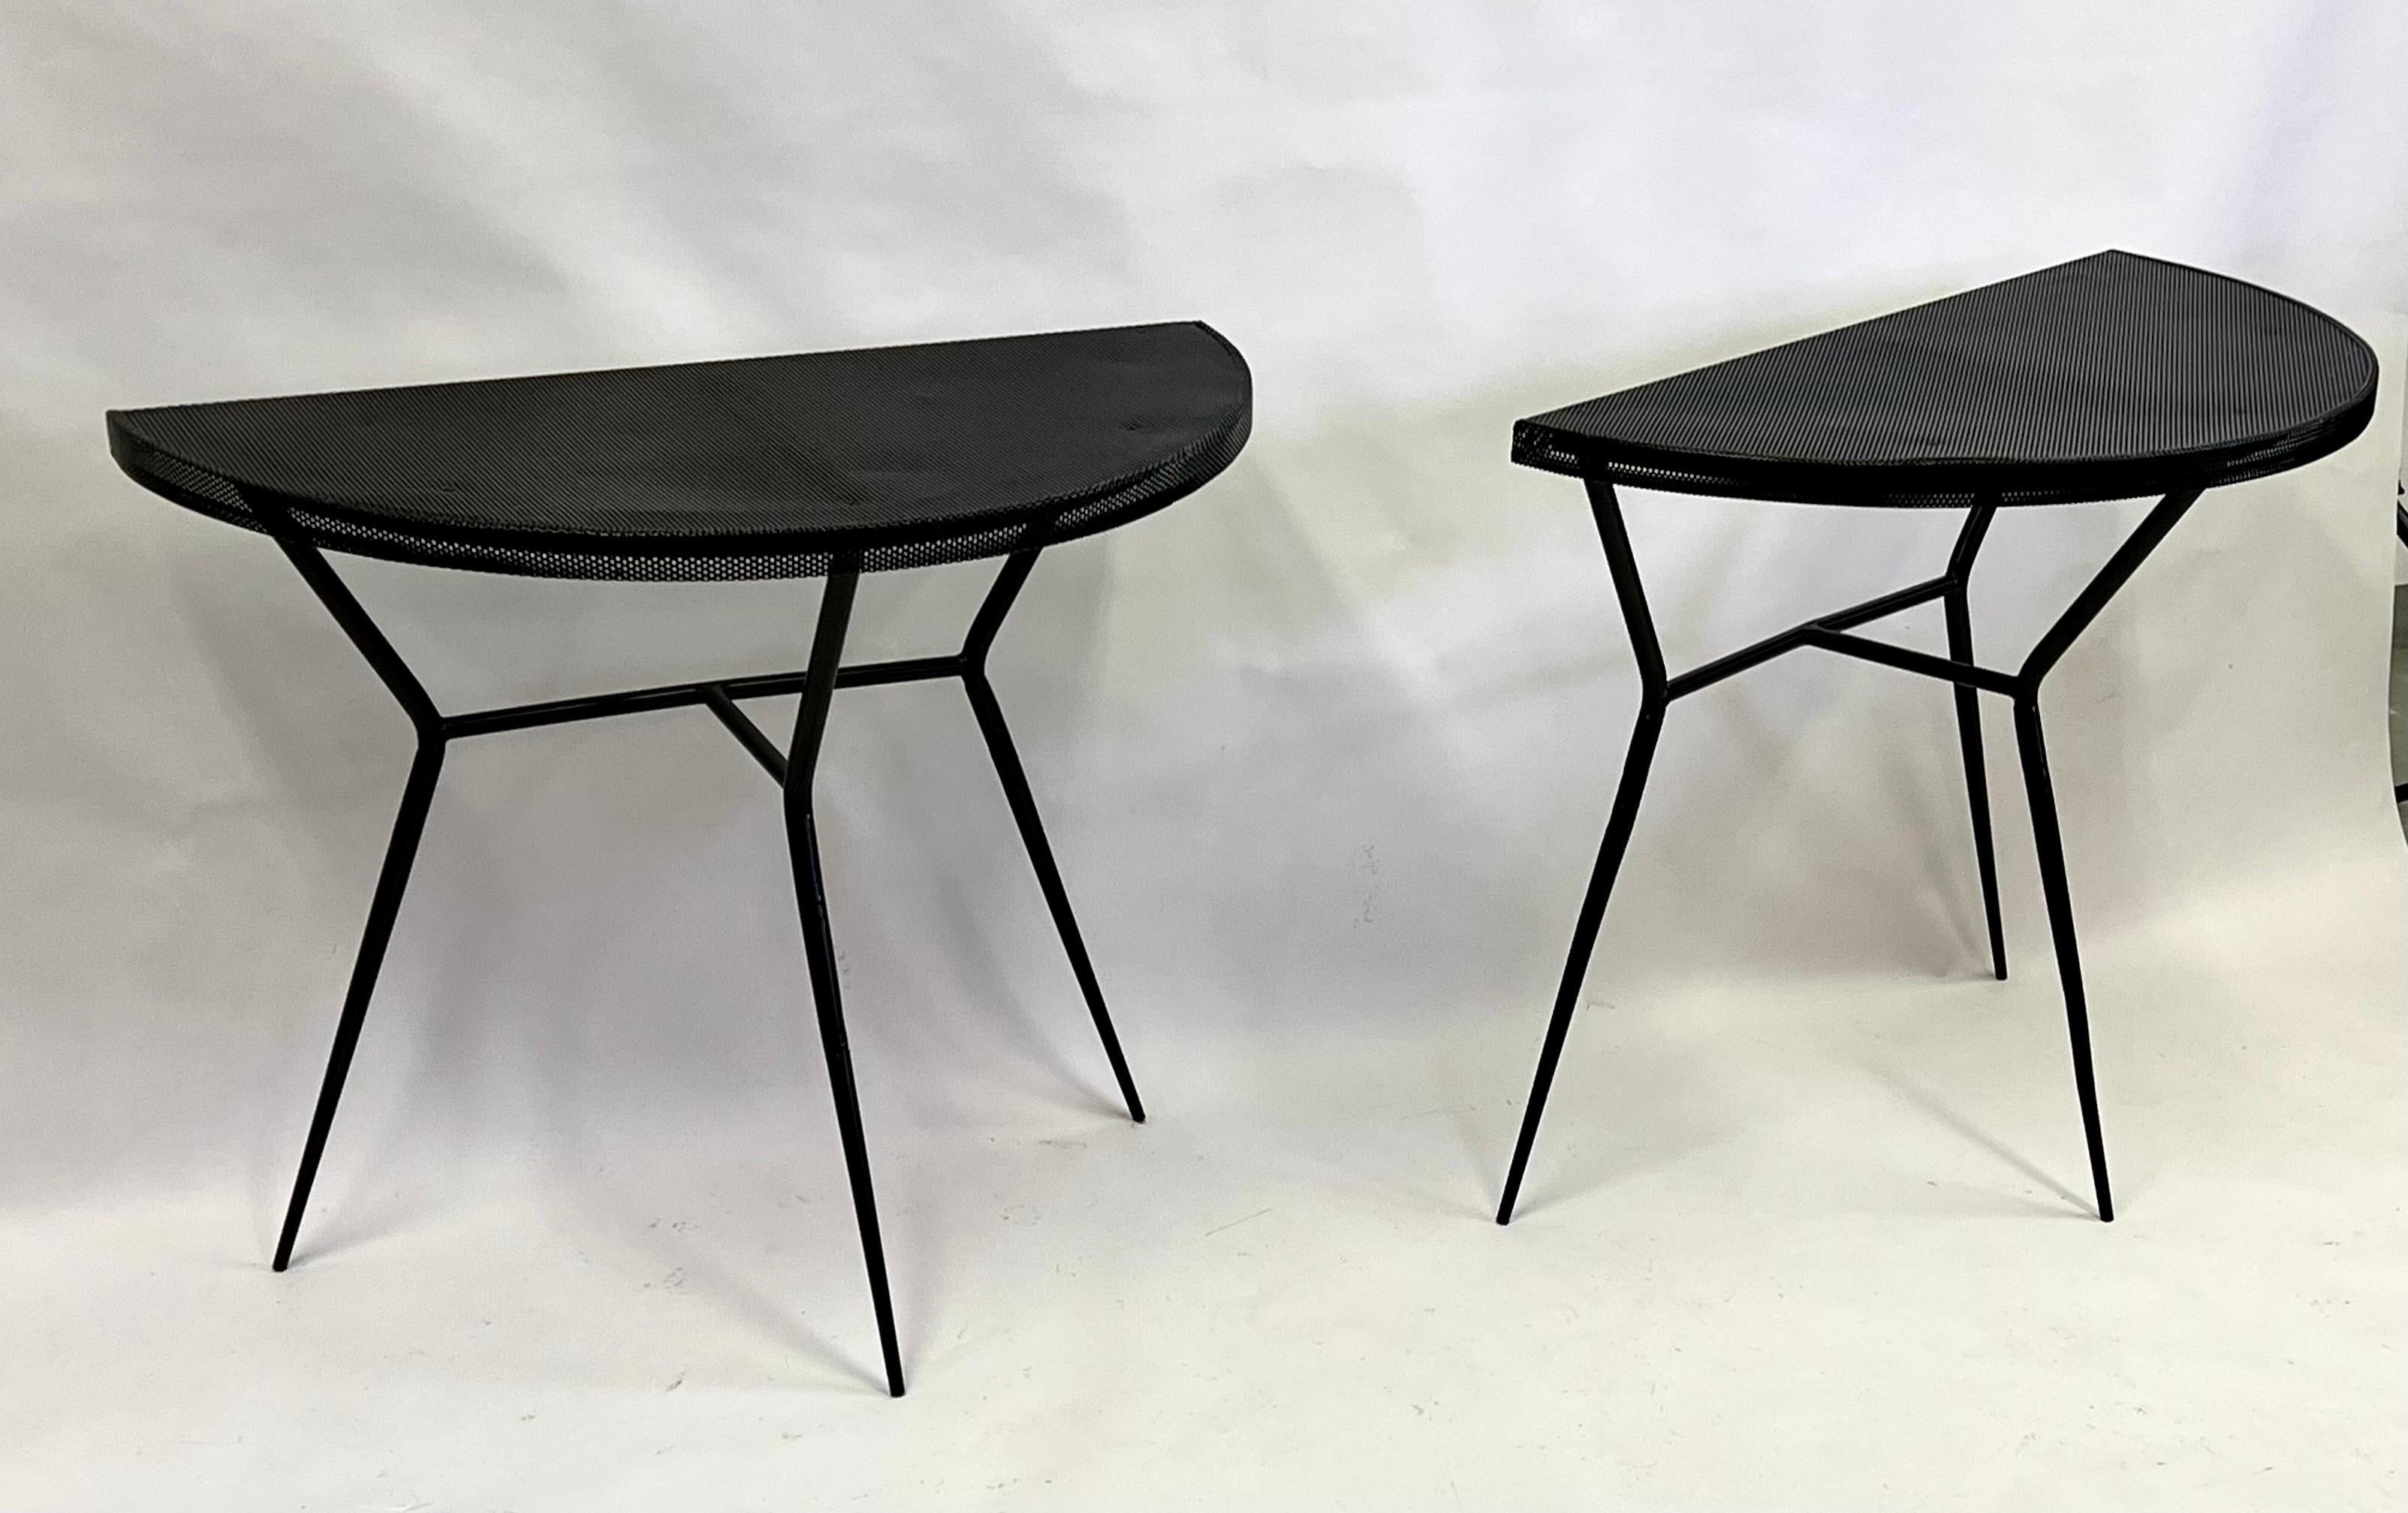 Hand-Painted Pair of French Midcentury Modern Perforated Metal Consoles Attr. Mathieu Mategot For Sale